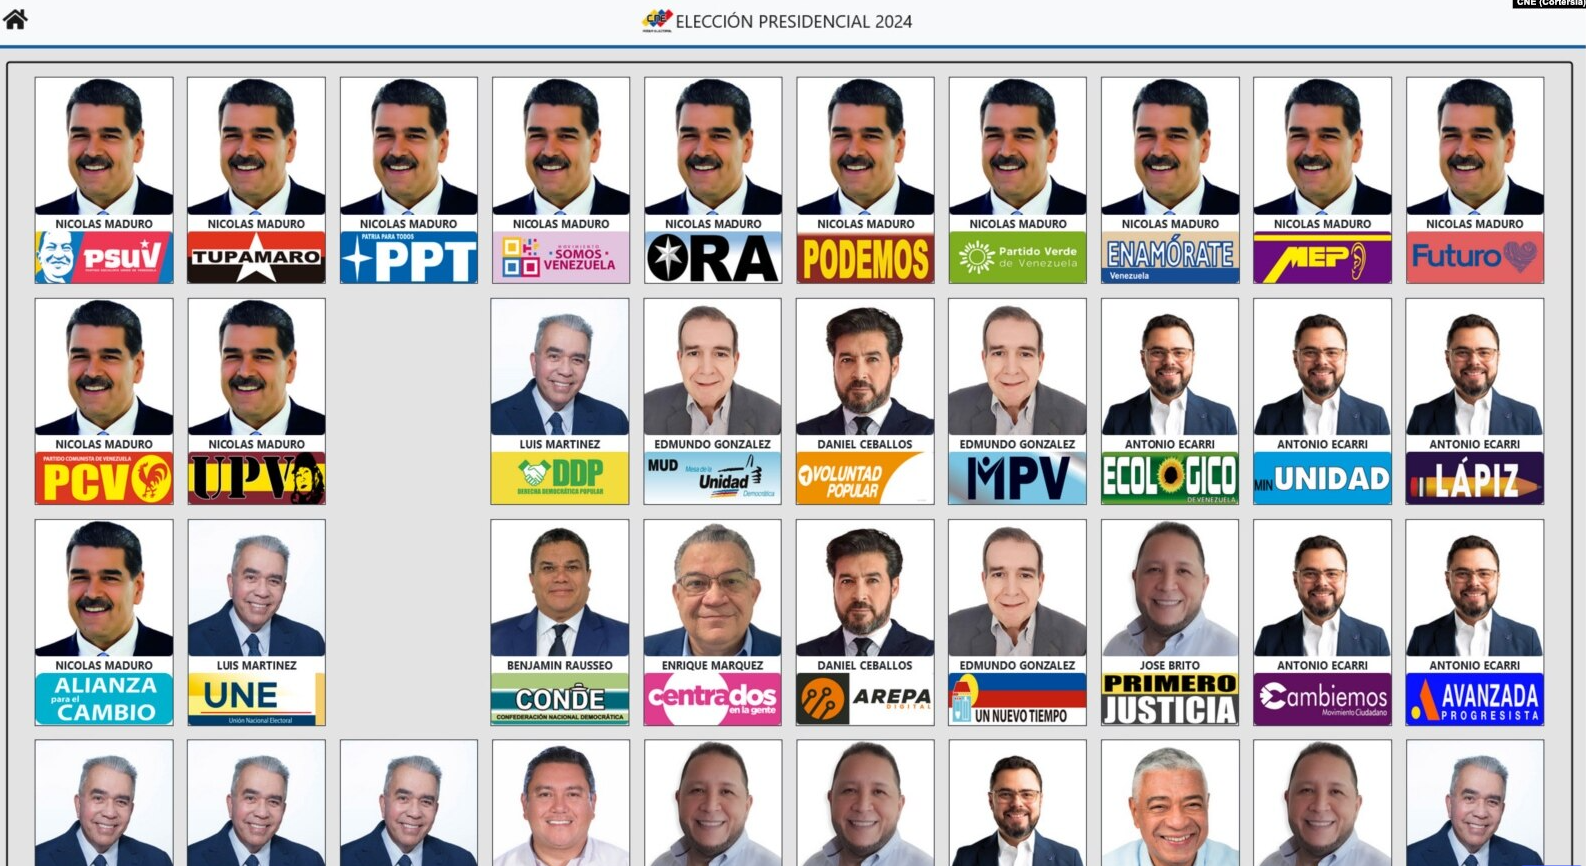 Nicolás Maduro's face appeared 13 times on election ballots in Venezuela, why?